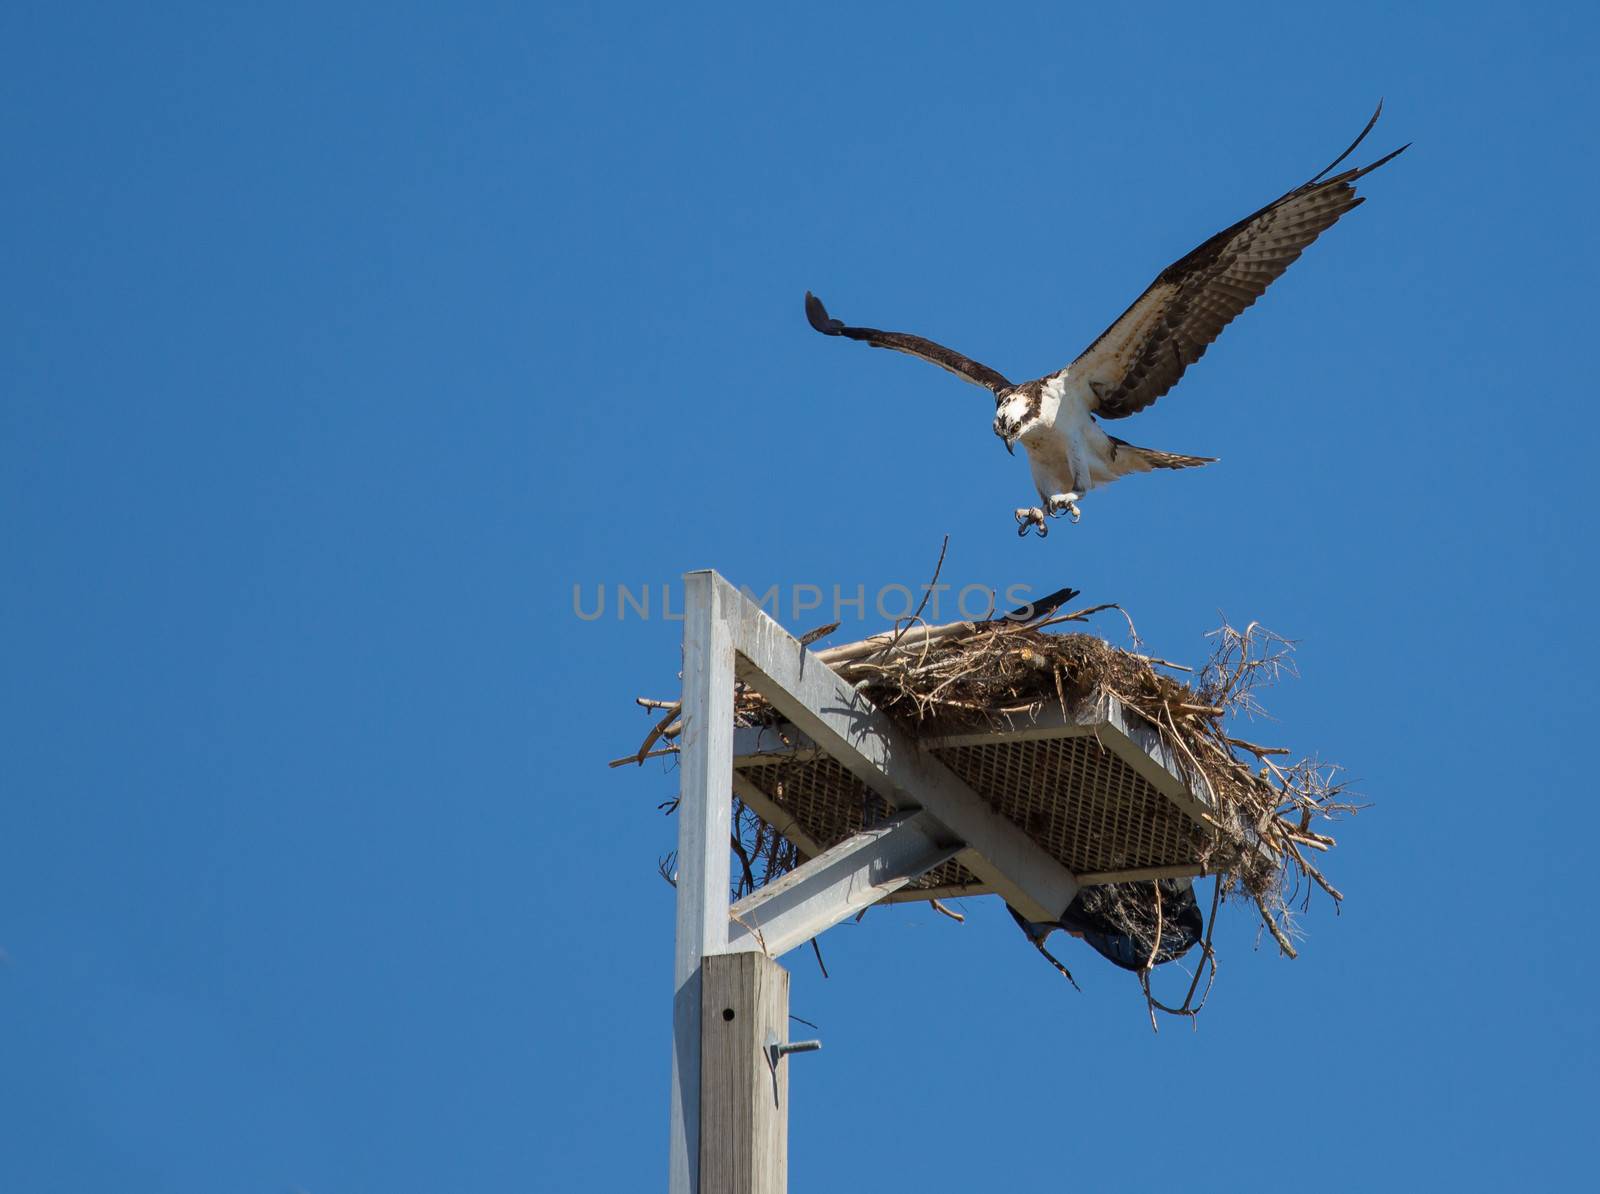 It looks like this Osprey is attacking a prey but it is actually landing in a nest shared with its mate.